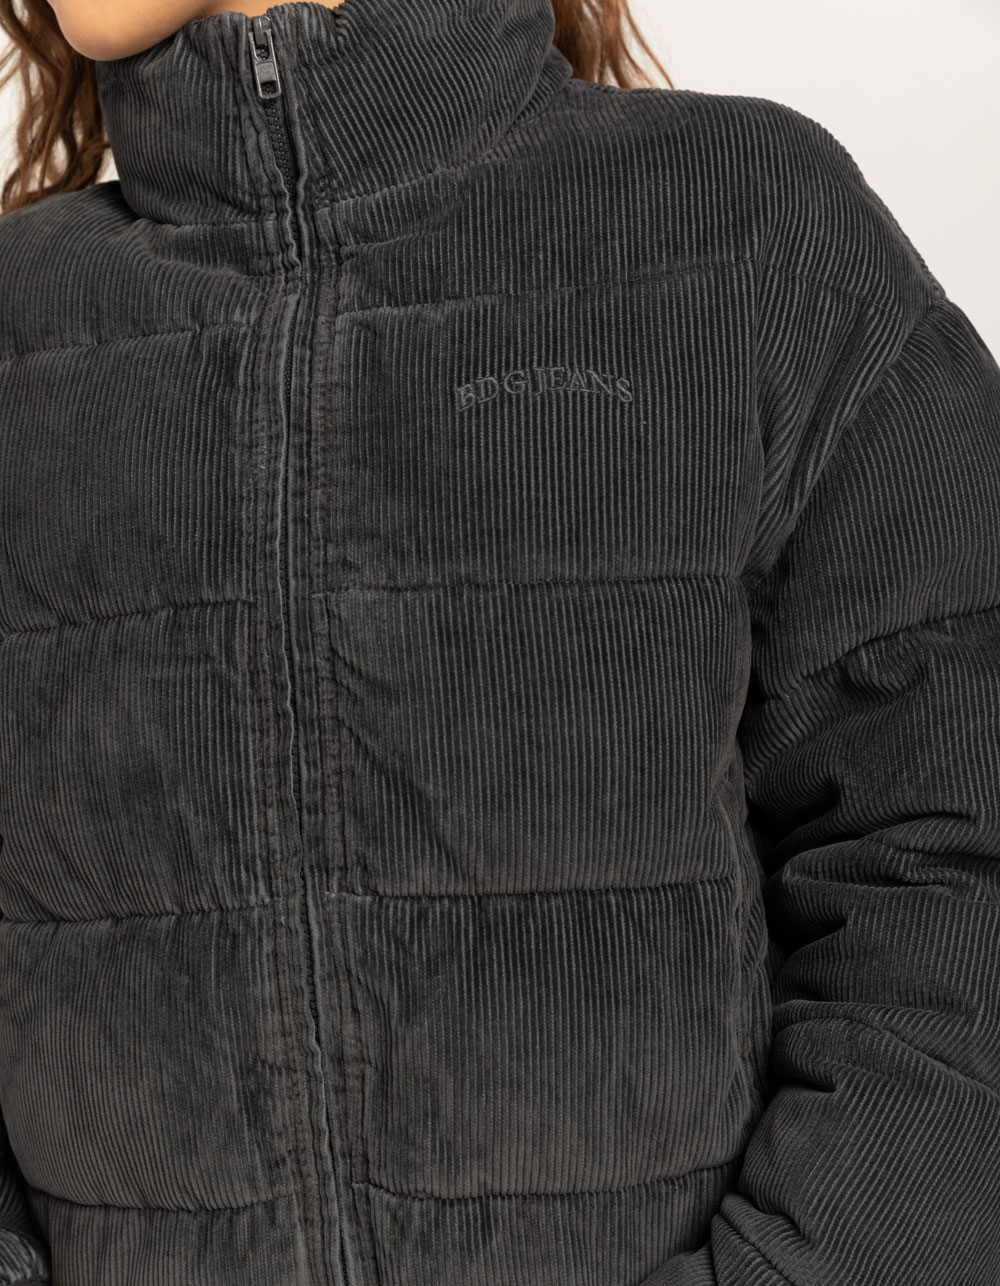 Womens Urban Puffer WASHED - Corduroy BLACK Jacket BDG Tillys Outfitters Donna |